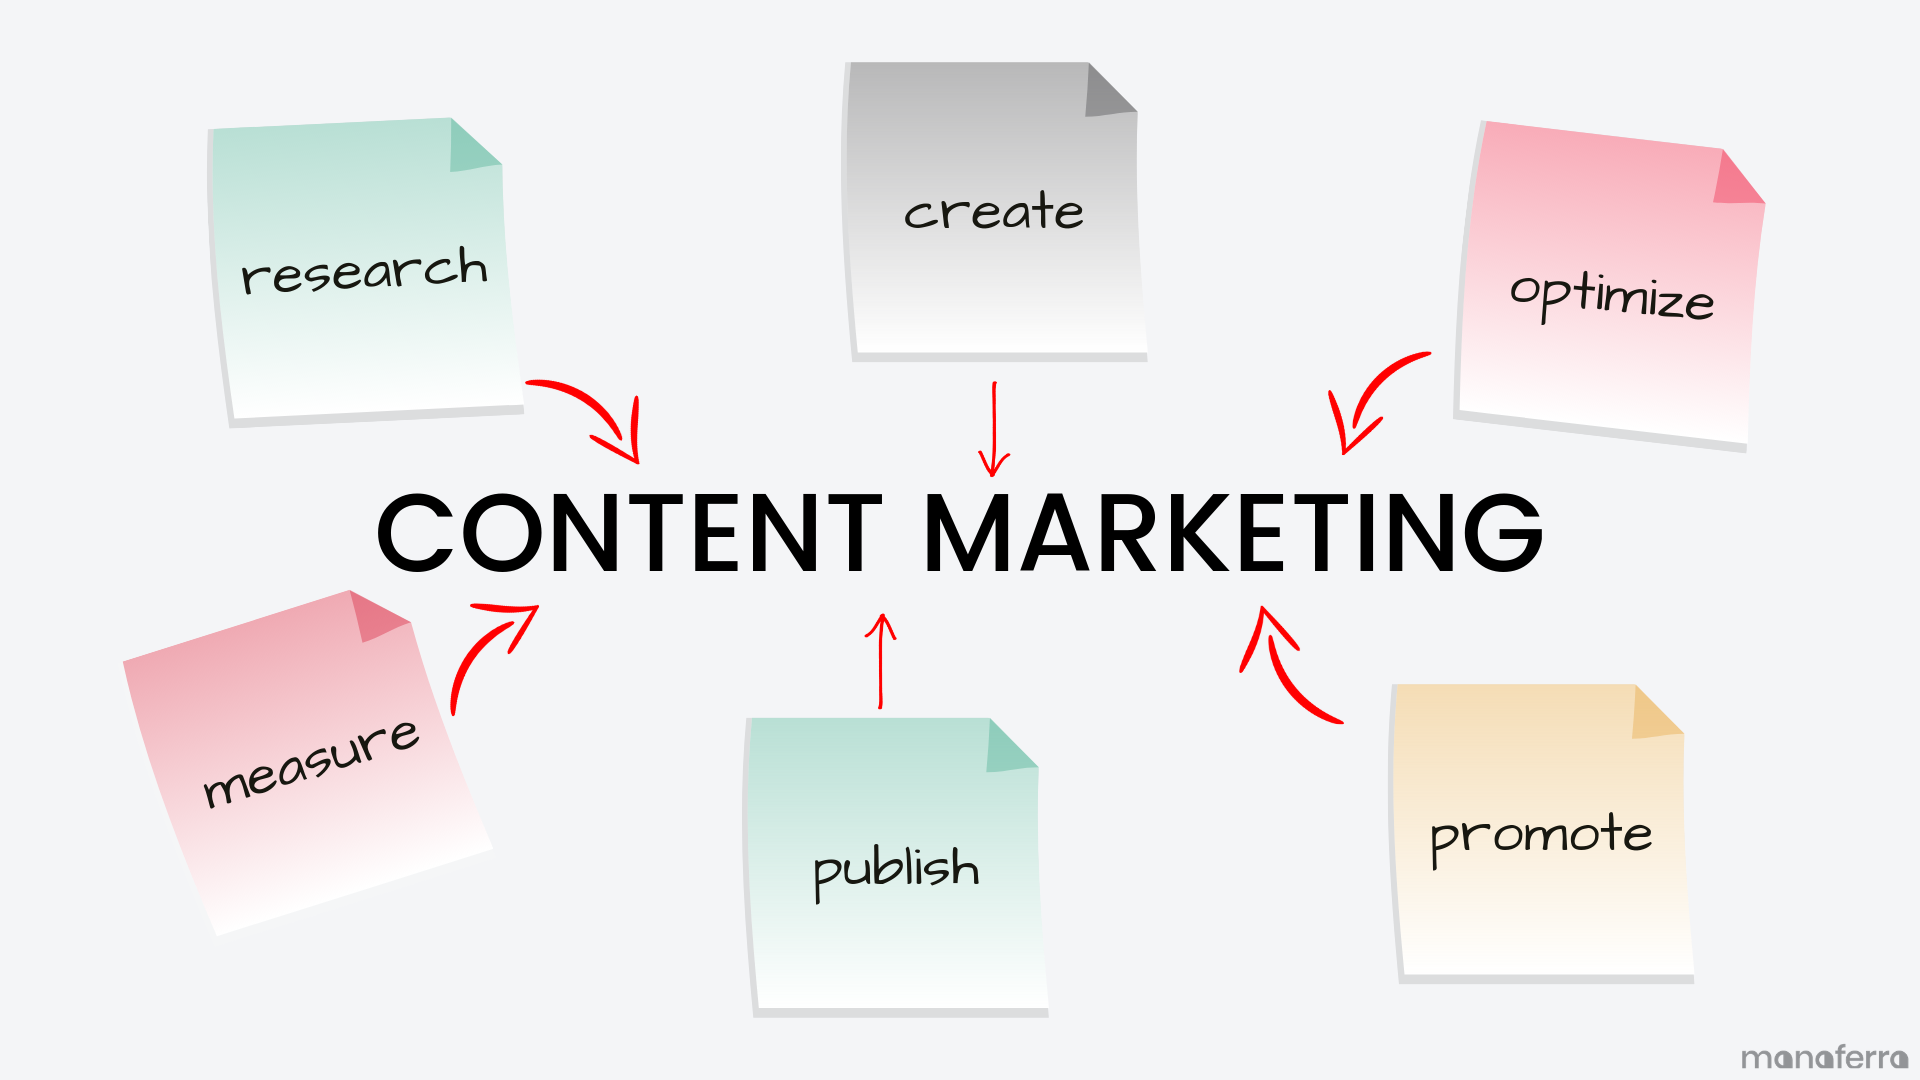 whats another word for content marketing